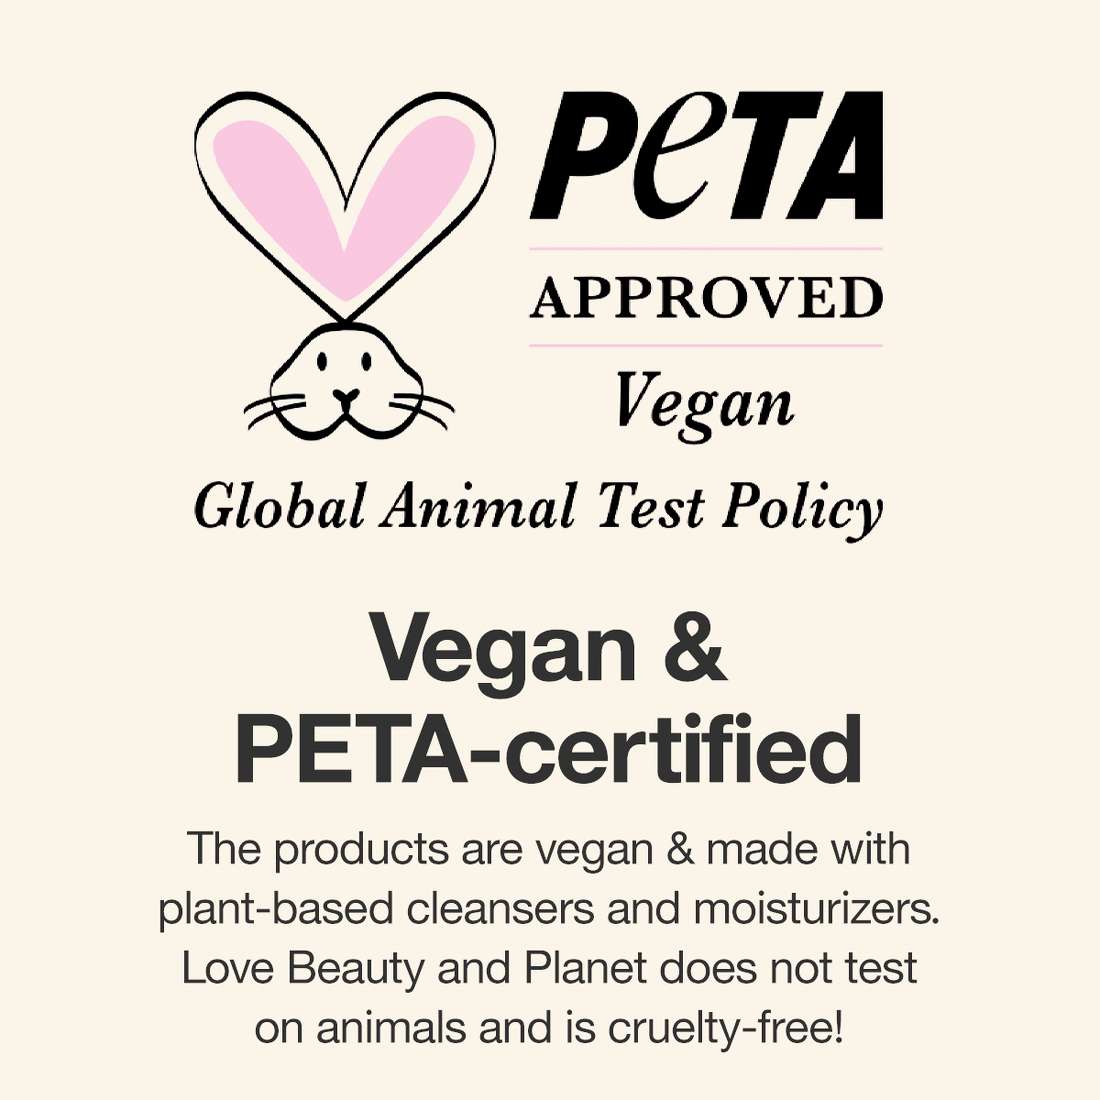 Peta Approved
Vegan Global Animal Test Policy
Vegan & PETA-certified
The products are vegan & made with plant-based cleansers and moisturizers. Love Beauty and Planet does not test on animals and is cruelty-free!